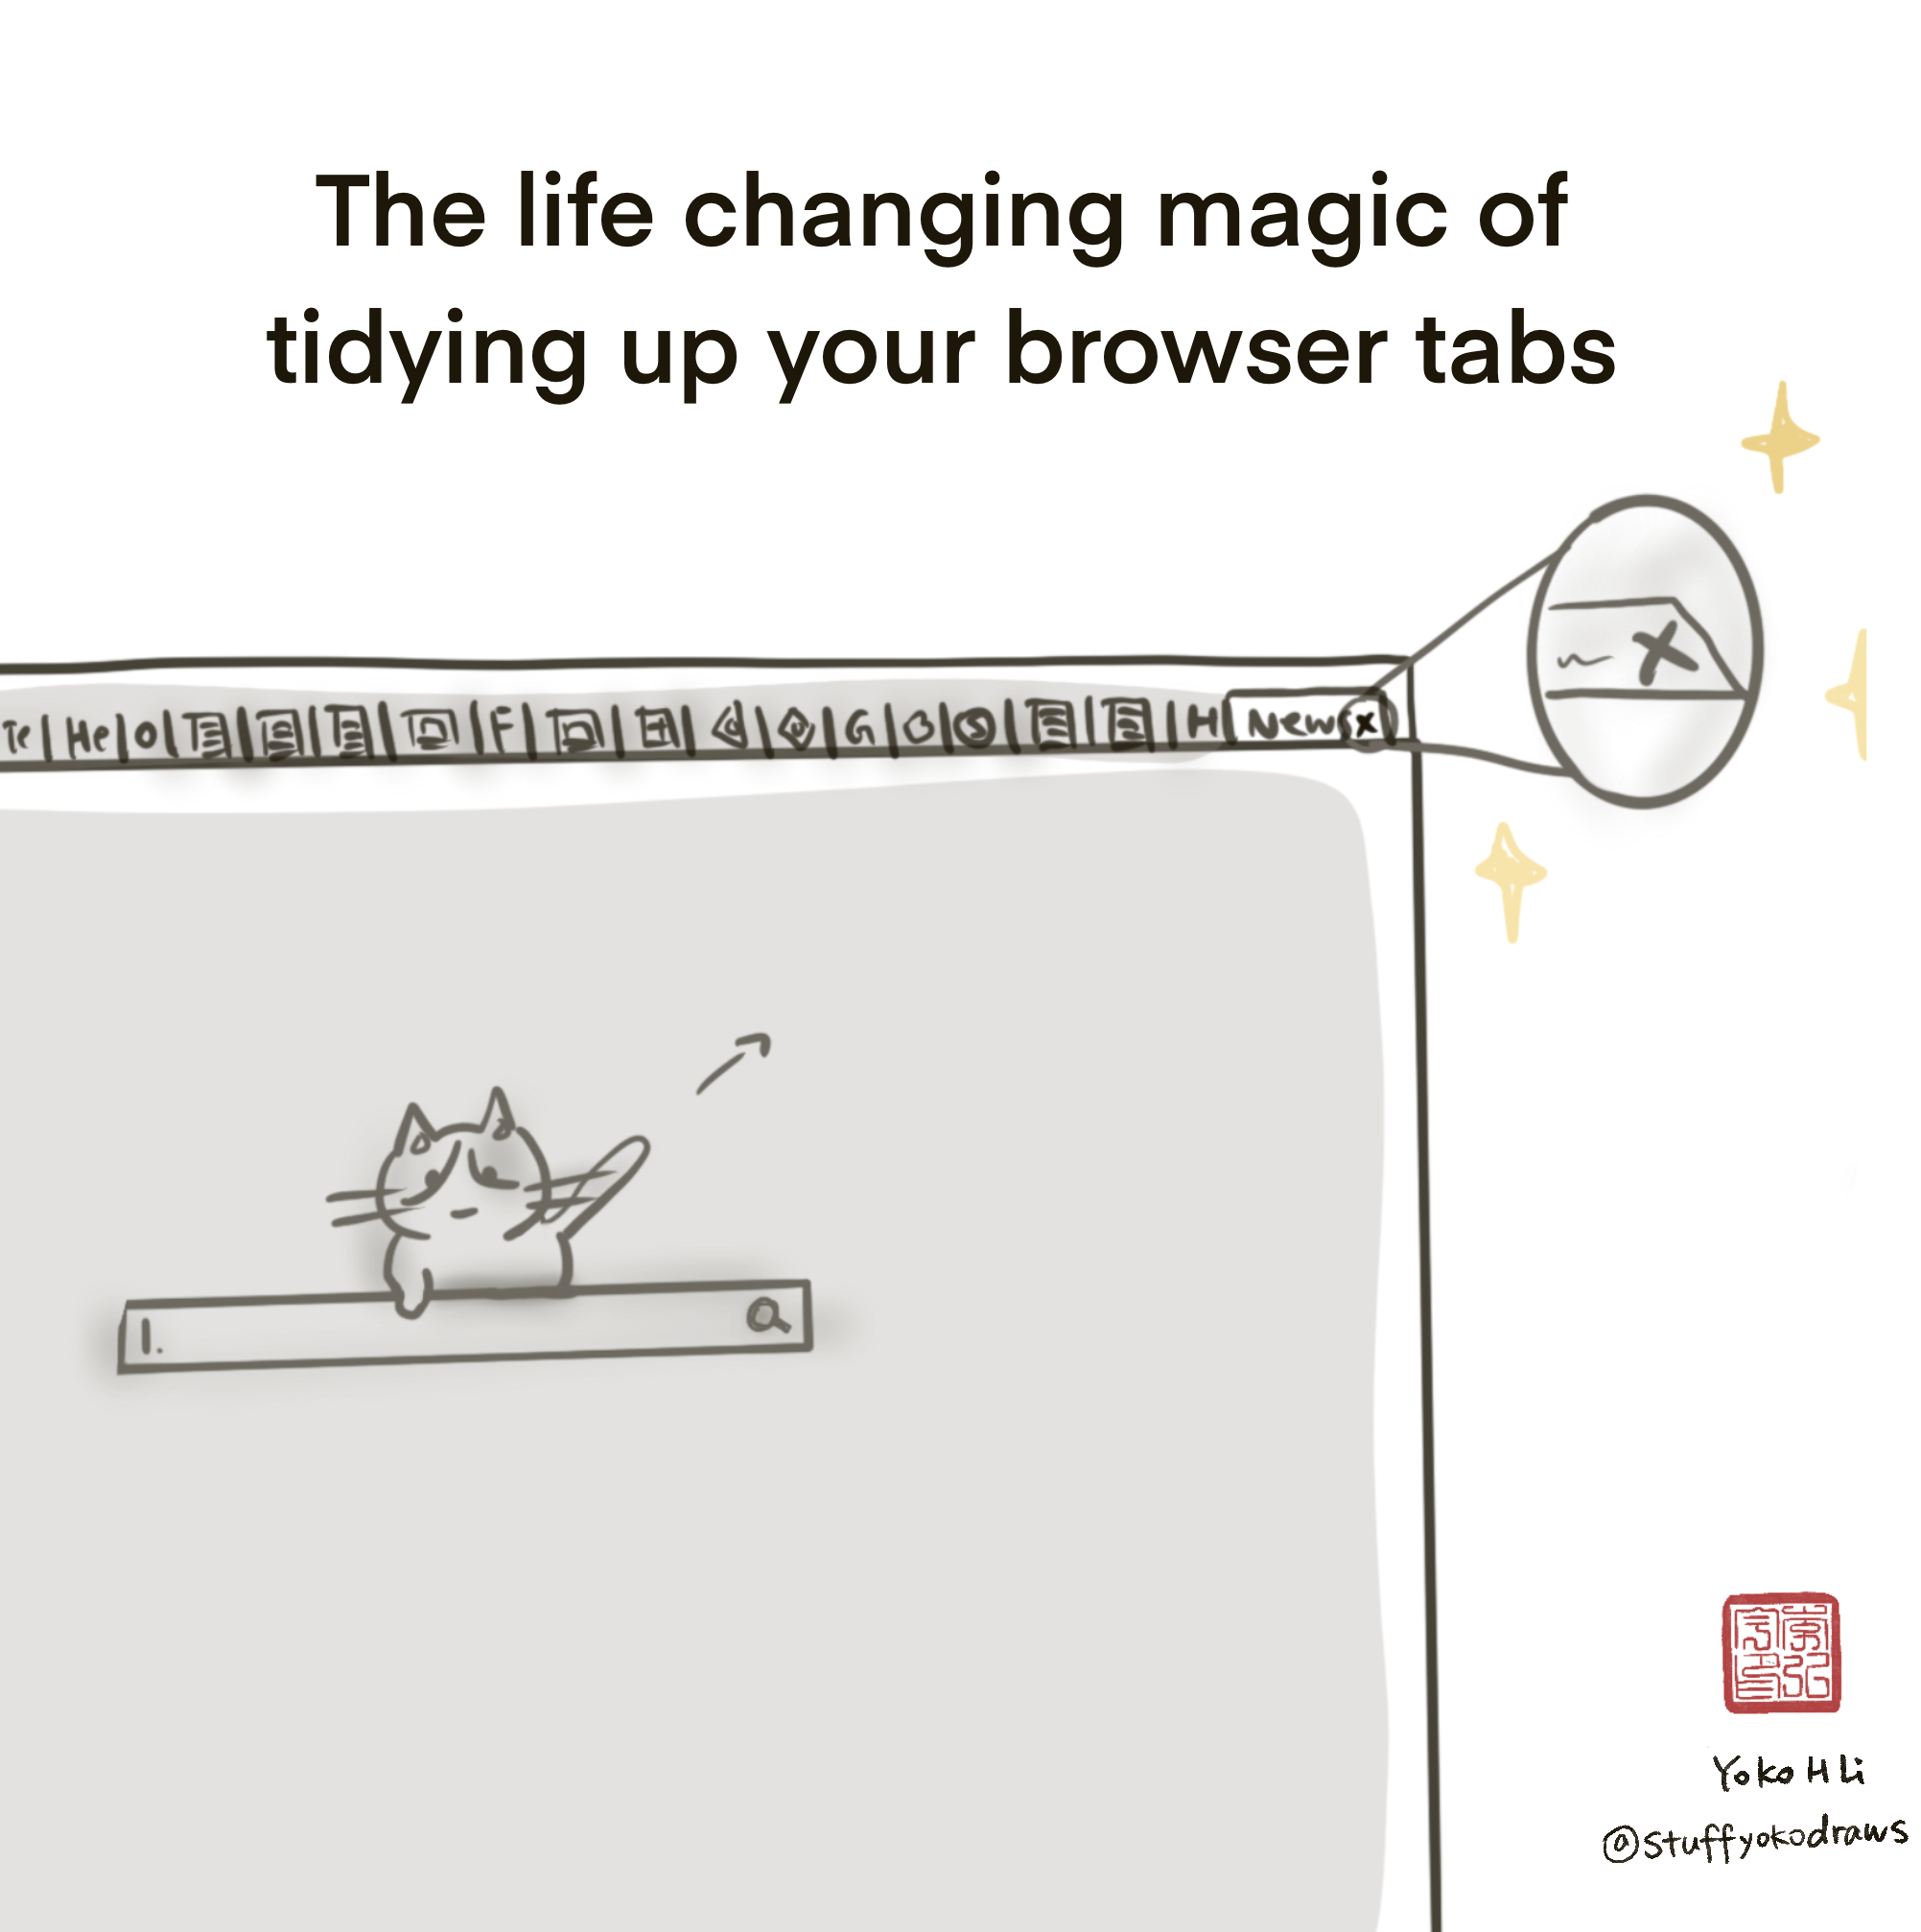 Tidying up Your Browser Tabs